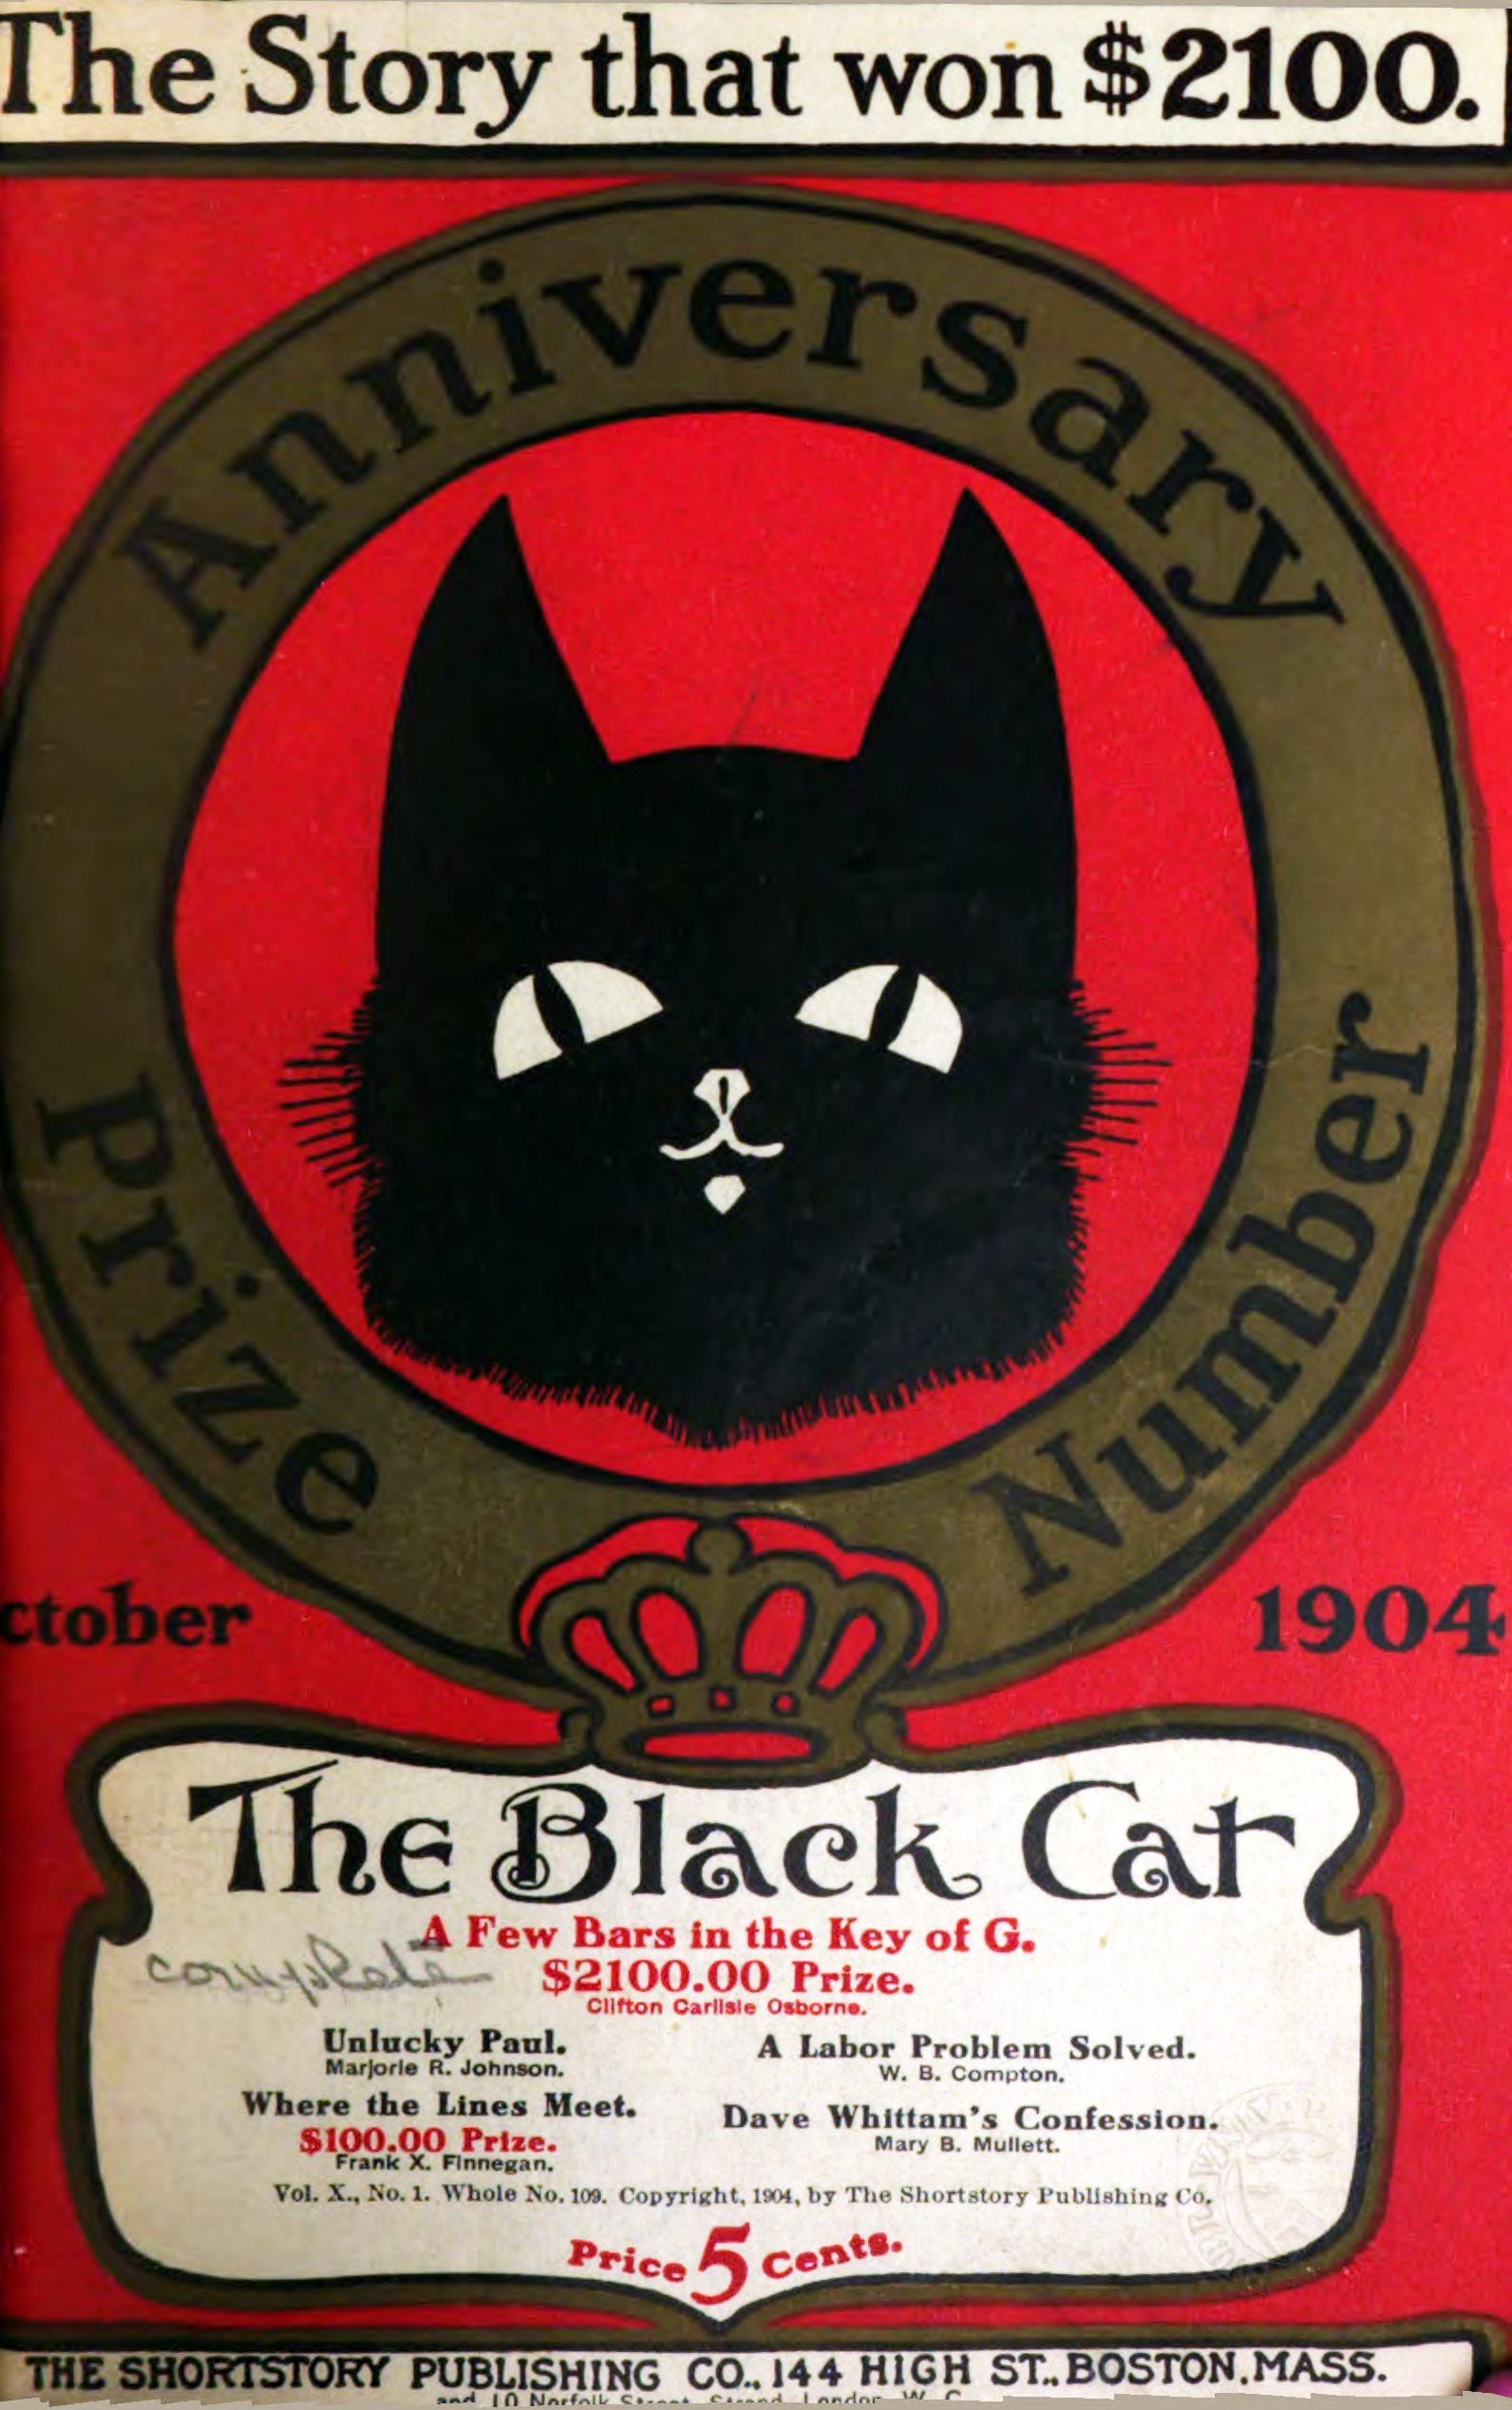 Selected Graphics from The Black Cat, October 1904